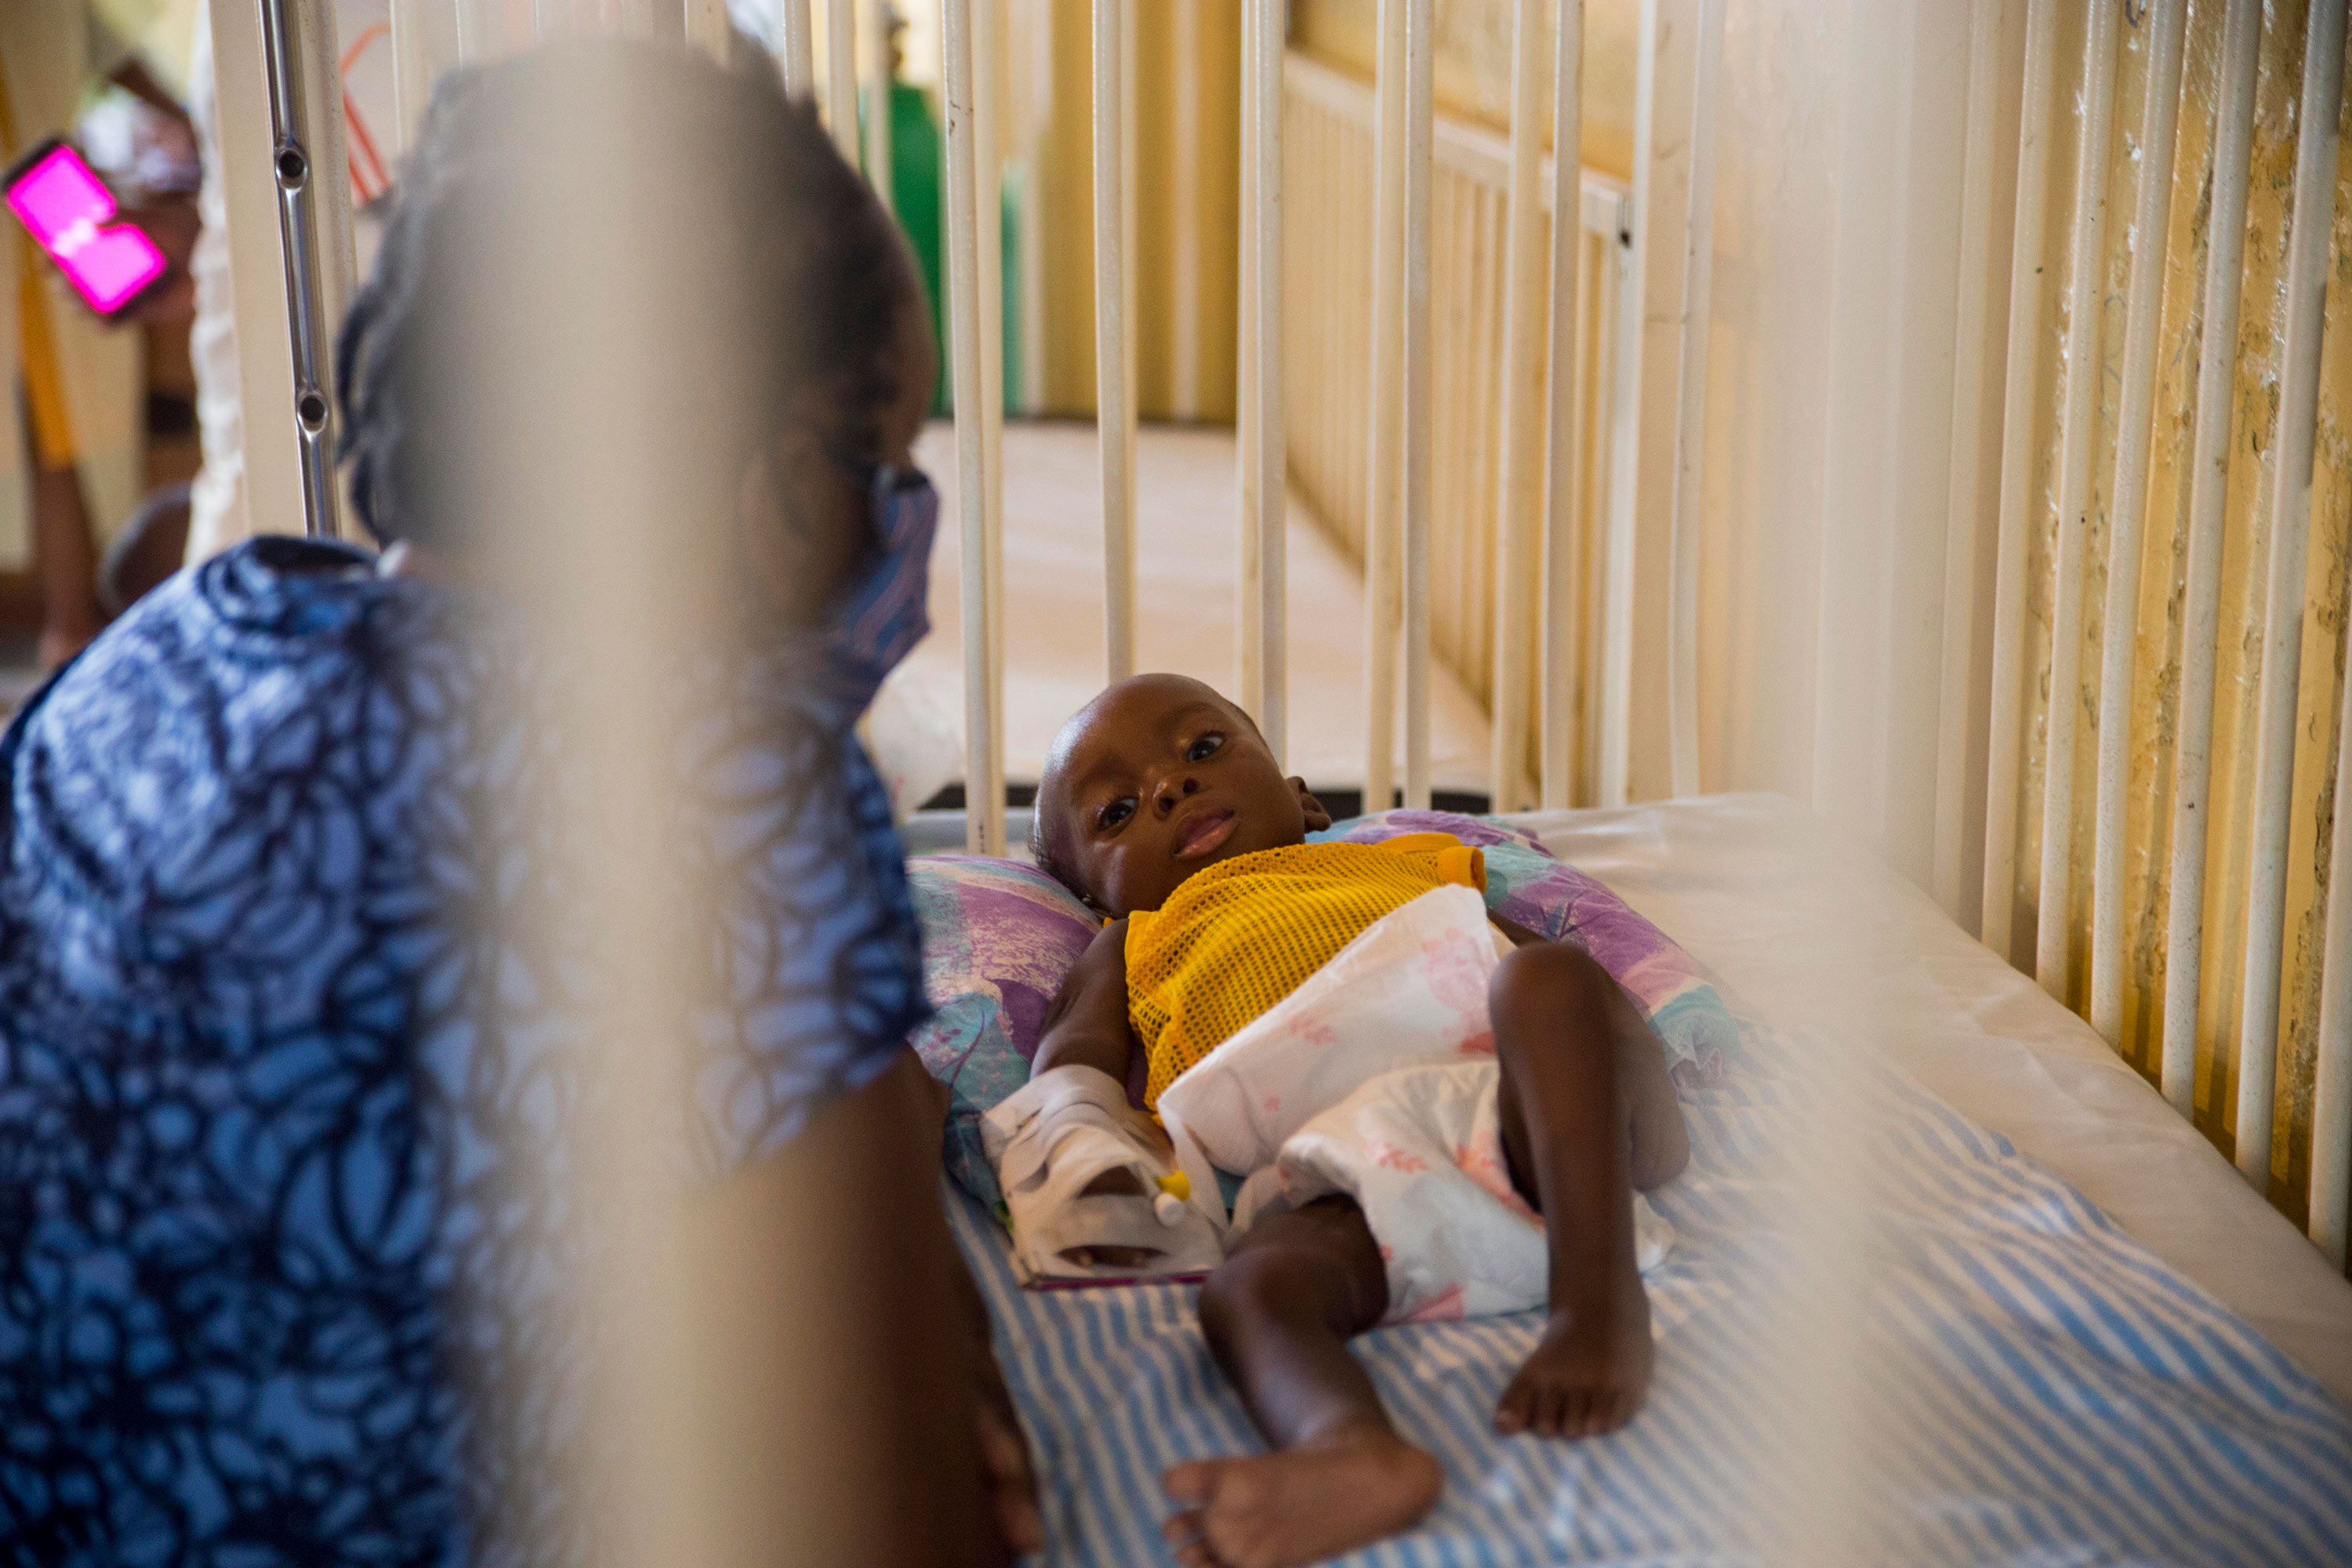 Marie Rose Emile watches over her 6-month-old grandson Jonise as he is treated for malnutrition at the Hospital of Immaculate Conception, in Les Cayes, Haiti, on Wednesday, May 26. 